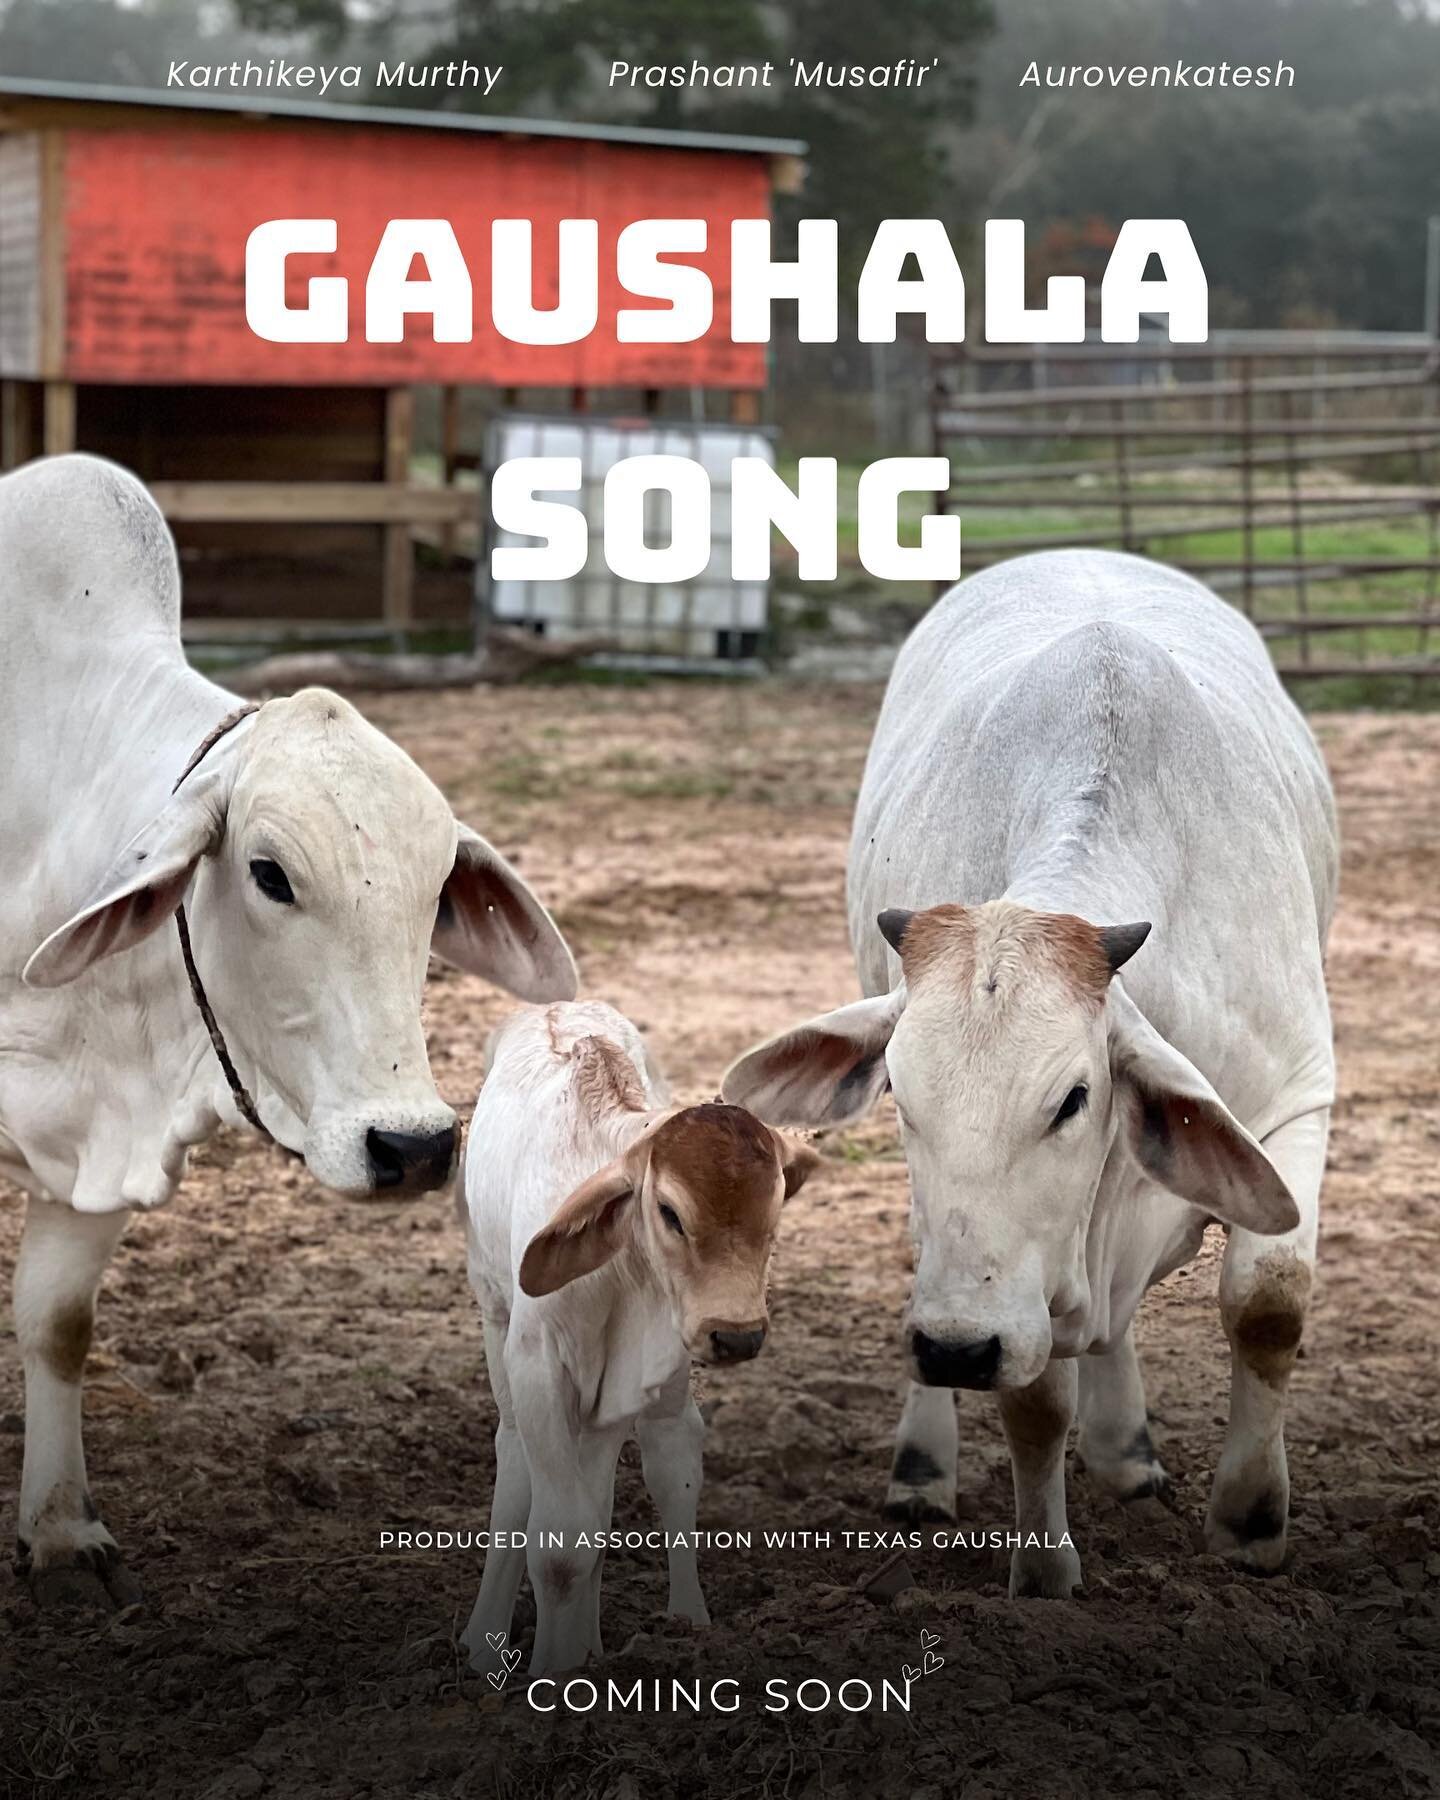 BefriendCows &amp; TexasGaushala bring you a song that celebrates Cows and Gaushalas. A fun &amp; creative collaboration by @kmthecomposer @pecificcreation @aurovenkatedh_dop @texasgaushala @vedictreebharatand @srinivp

Visit us for more details abou